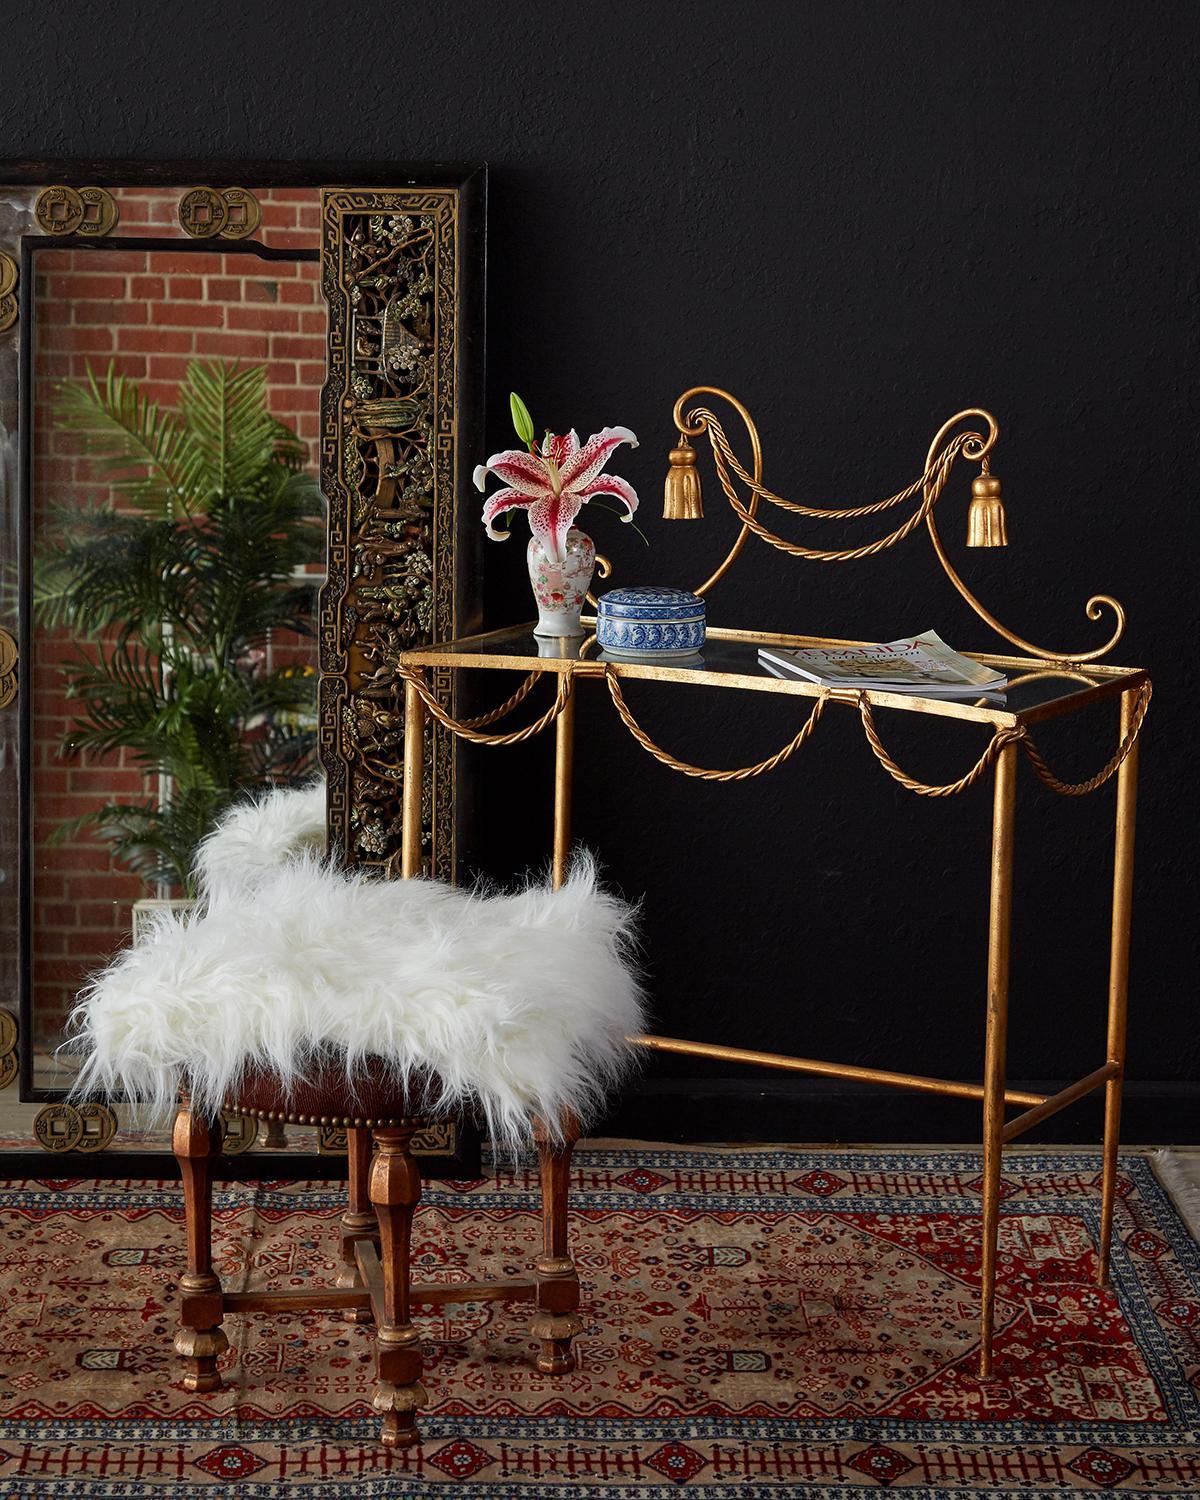 Diminutive gilt iron and faux rope vanity or console table made in the glamorous Hollywood Regency taste. Features a gilded iron frame decorated with iron rope swag and tassels. The top is scalloped with a glass insert and is supported by elegant